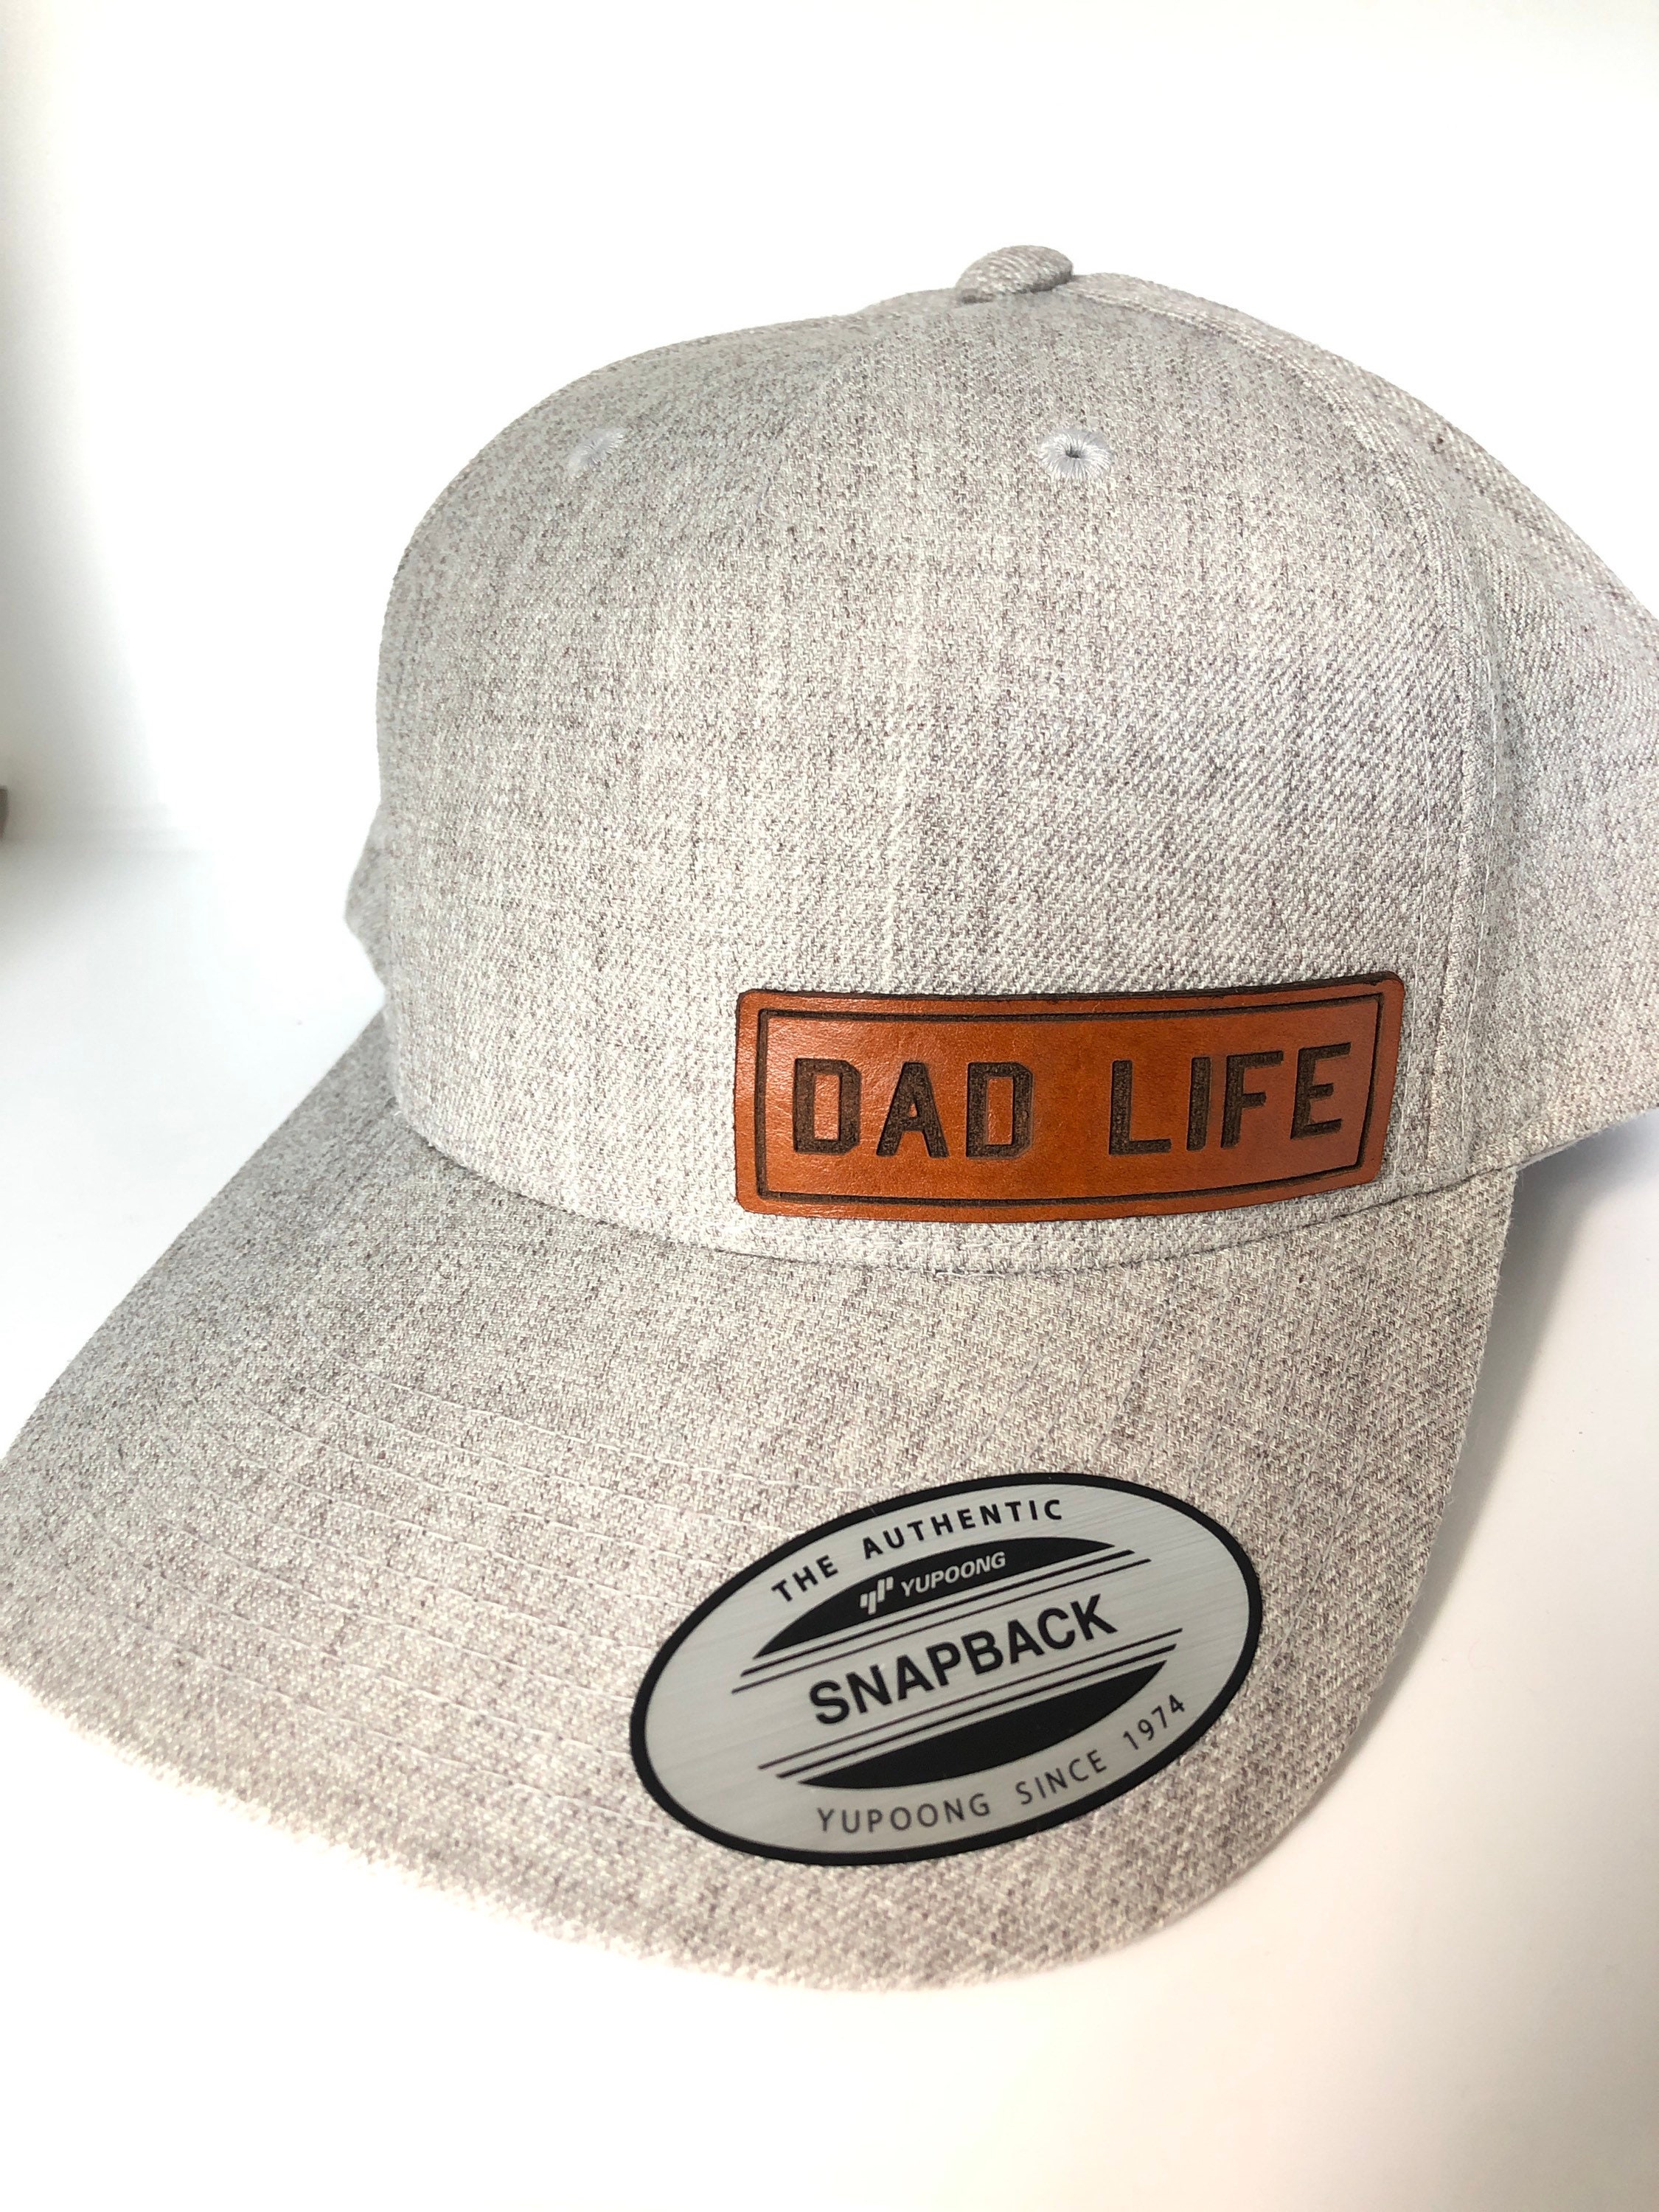 Dad life hat Yupoong SnapBack hat for dad. Dad life leather | Etsy